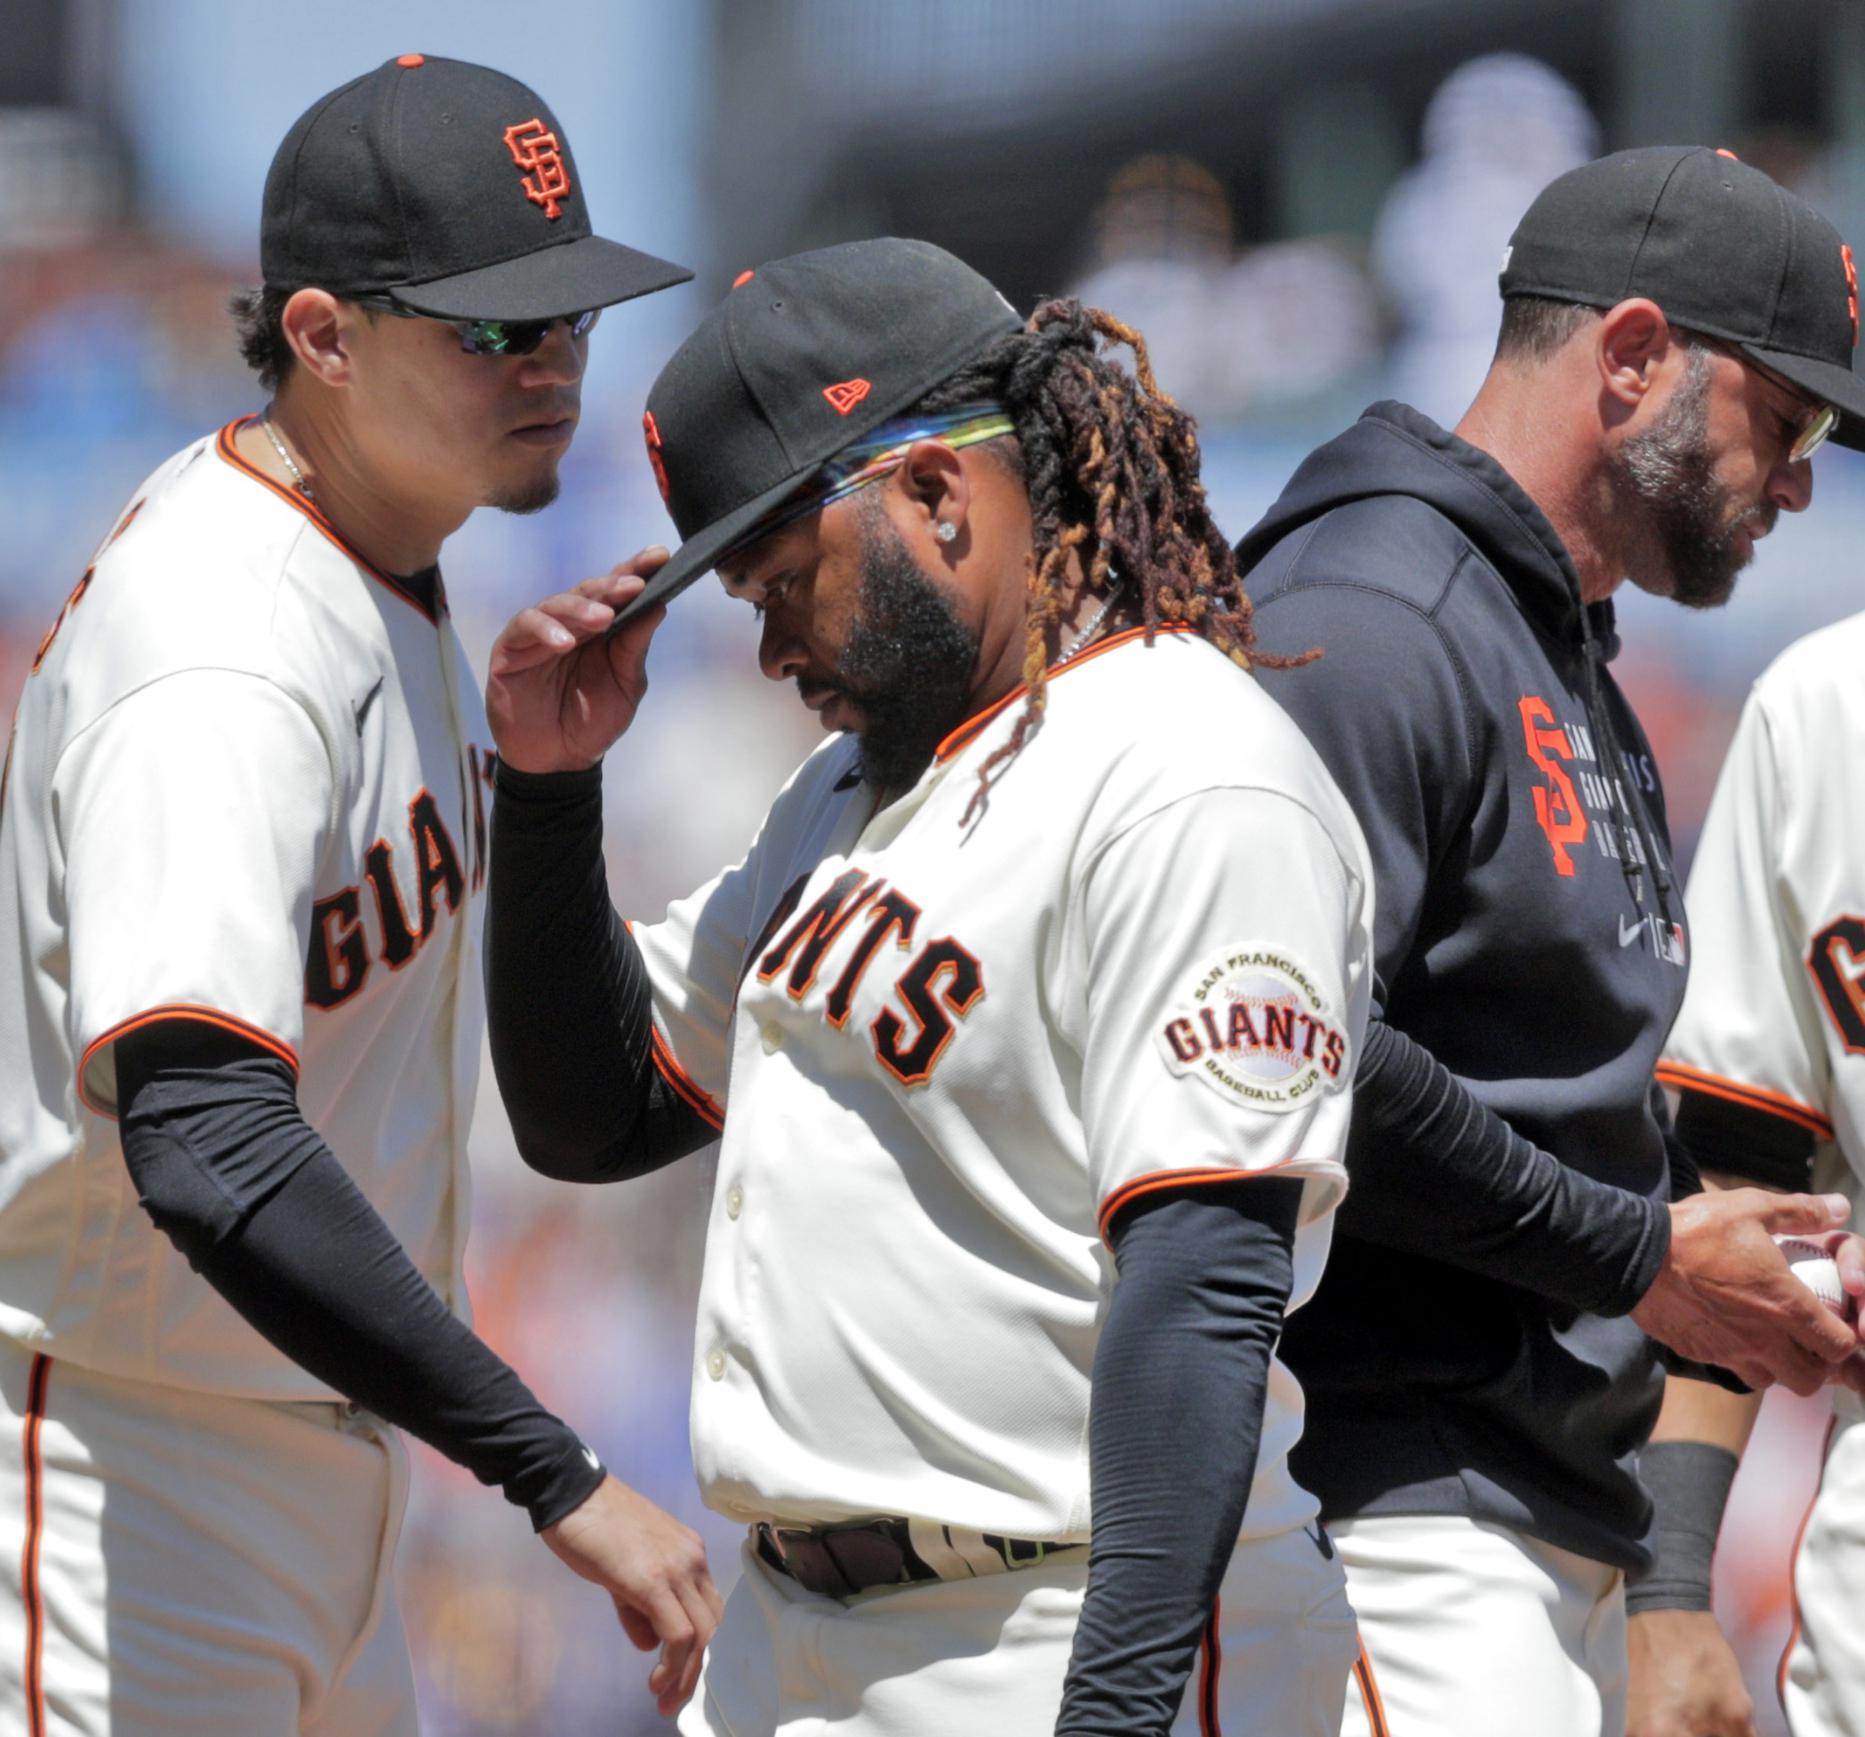 Giants' Johnny Cueto vs. Buster Posey and other spring story lines